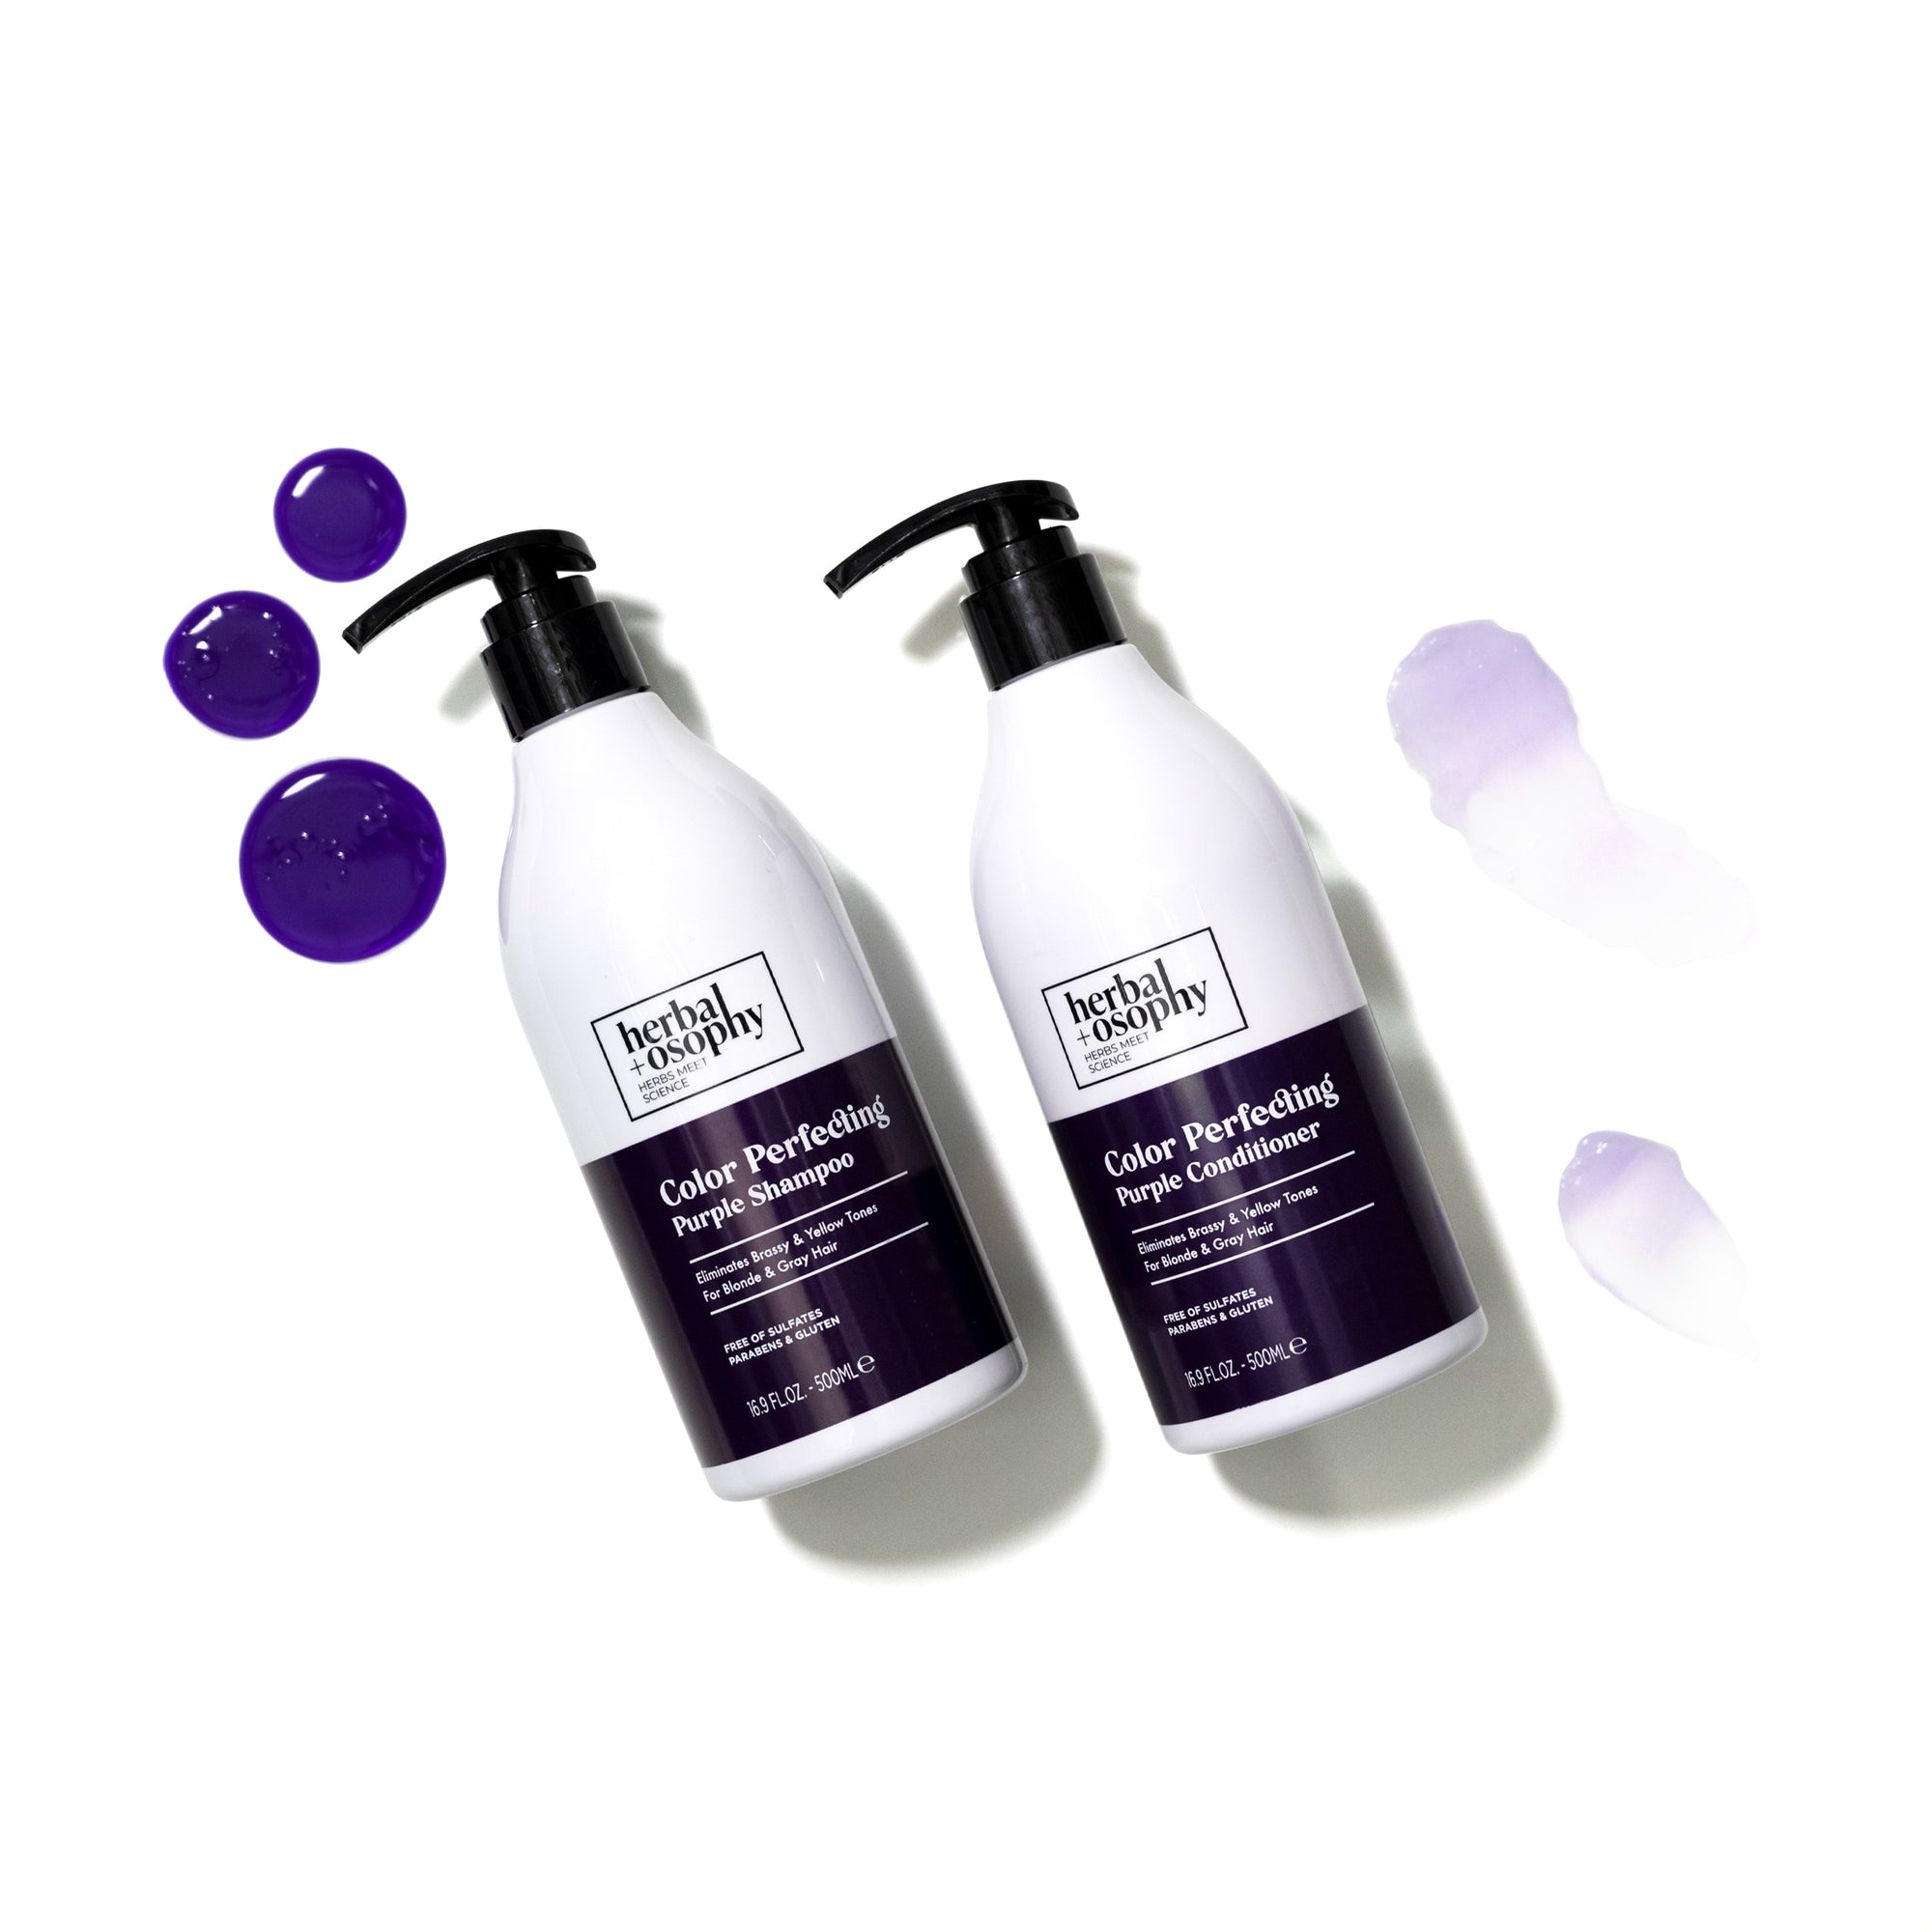 Herbalosophy Color Perfecting Purple Shampoo and Conditioner bottles on white background with purple drops and smears of product